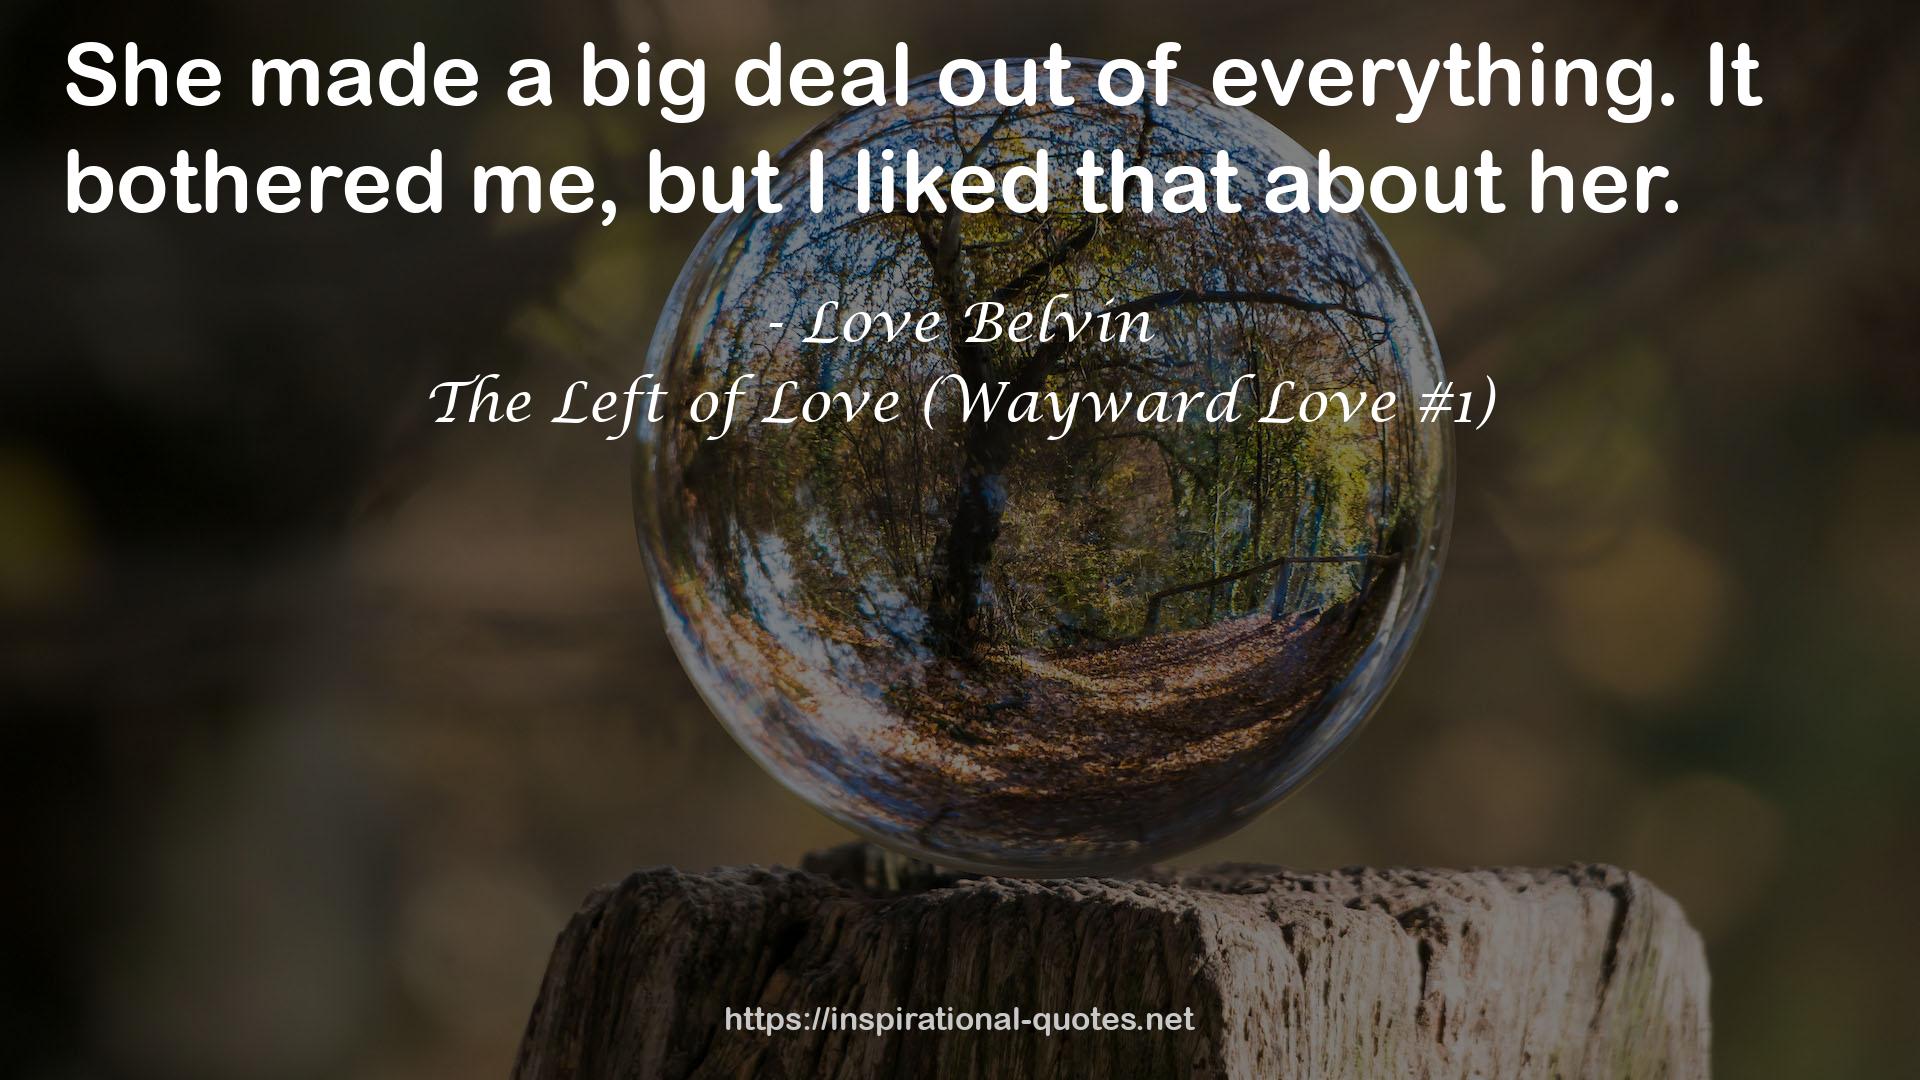 The Left of Love (Wayward Love #1) QUOTES